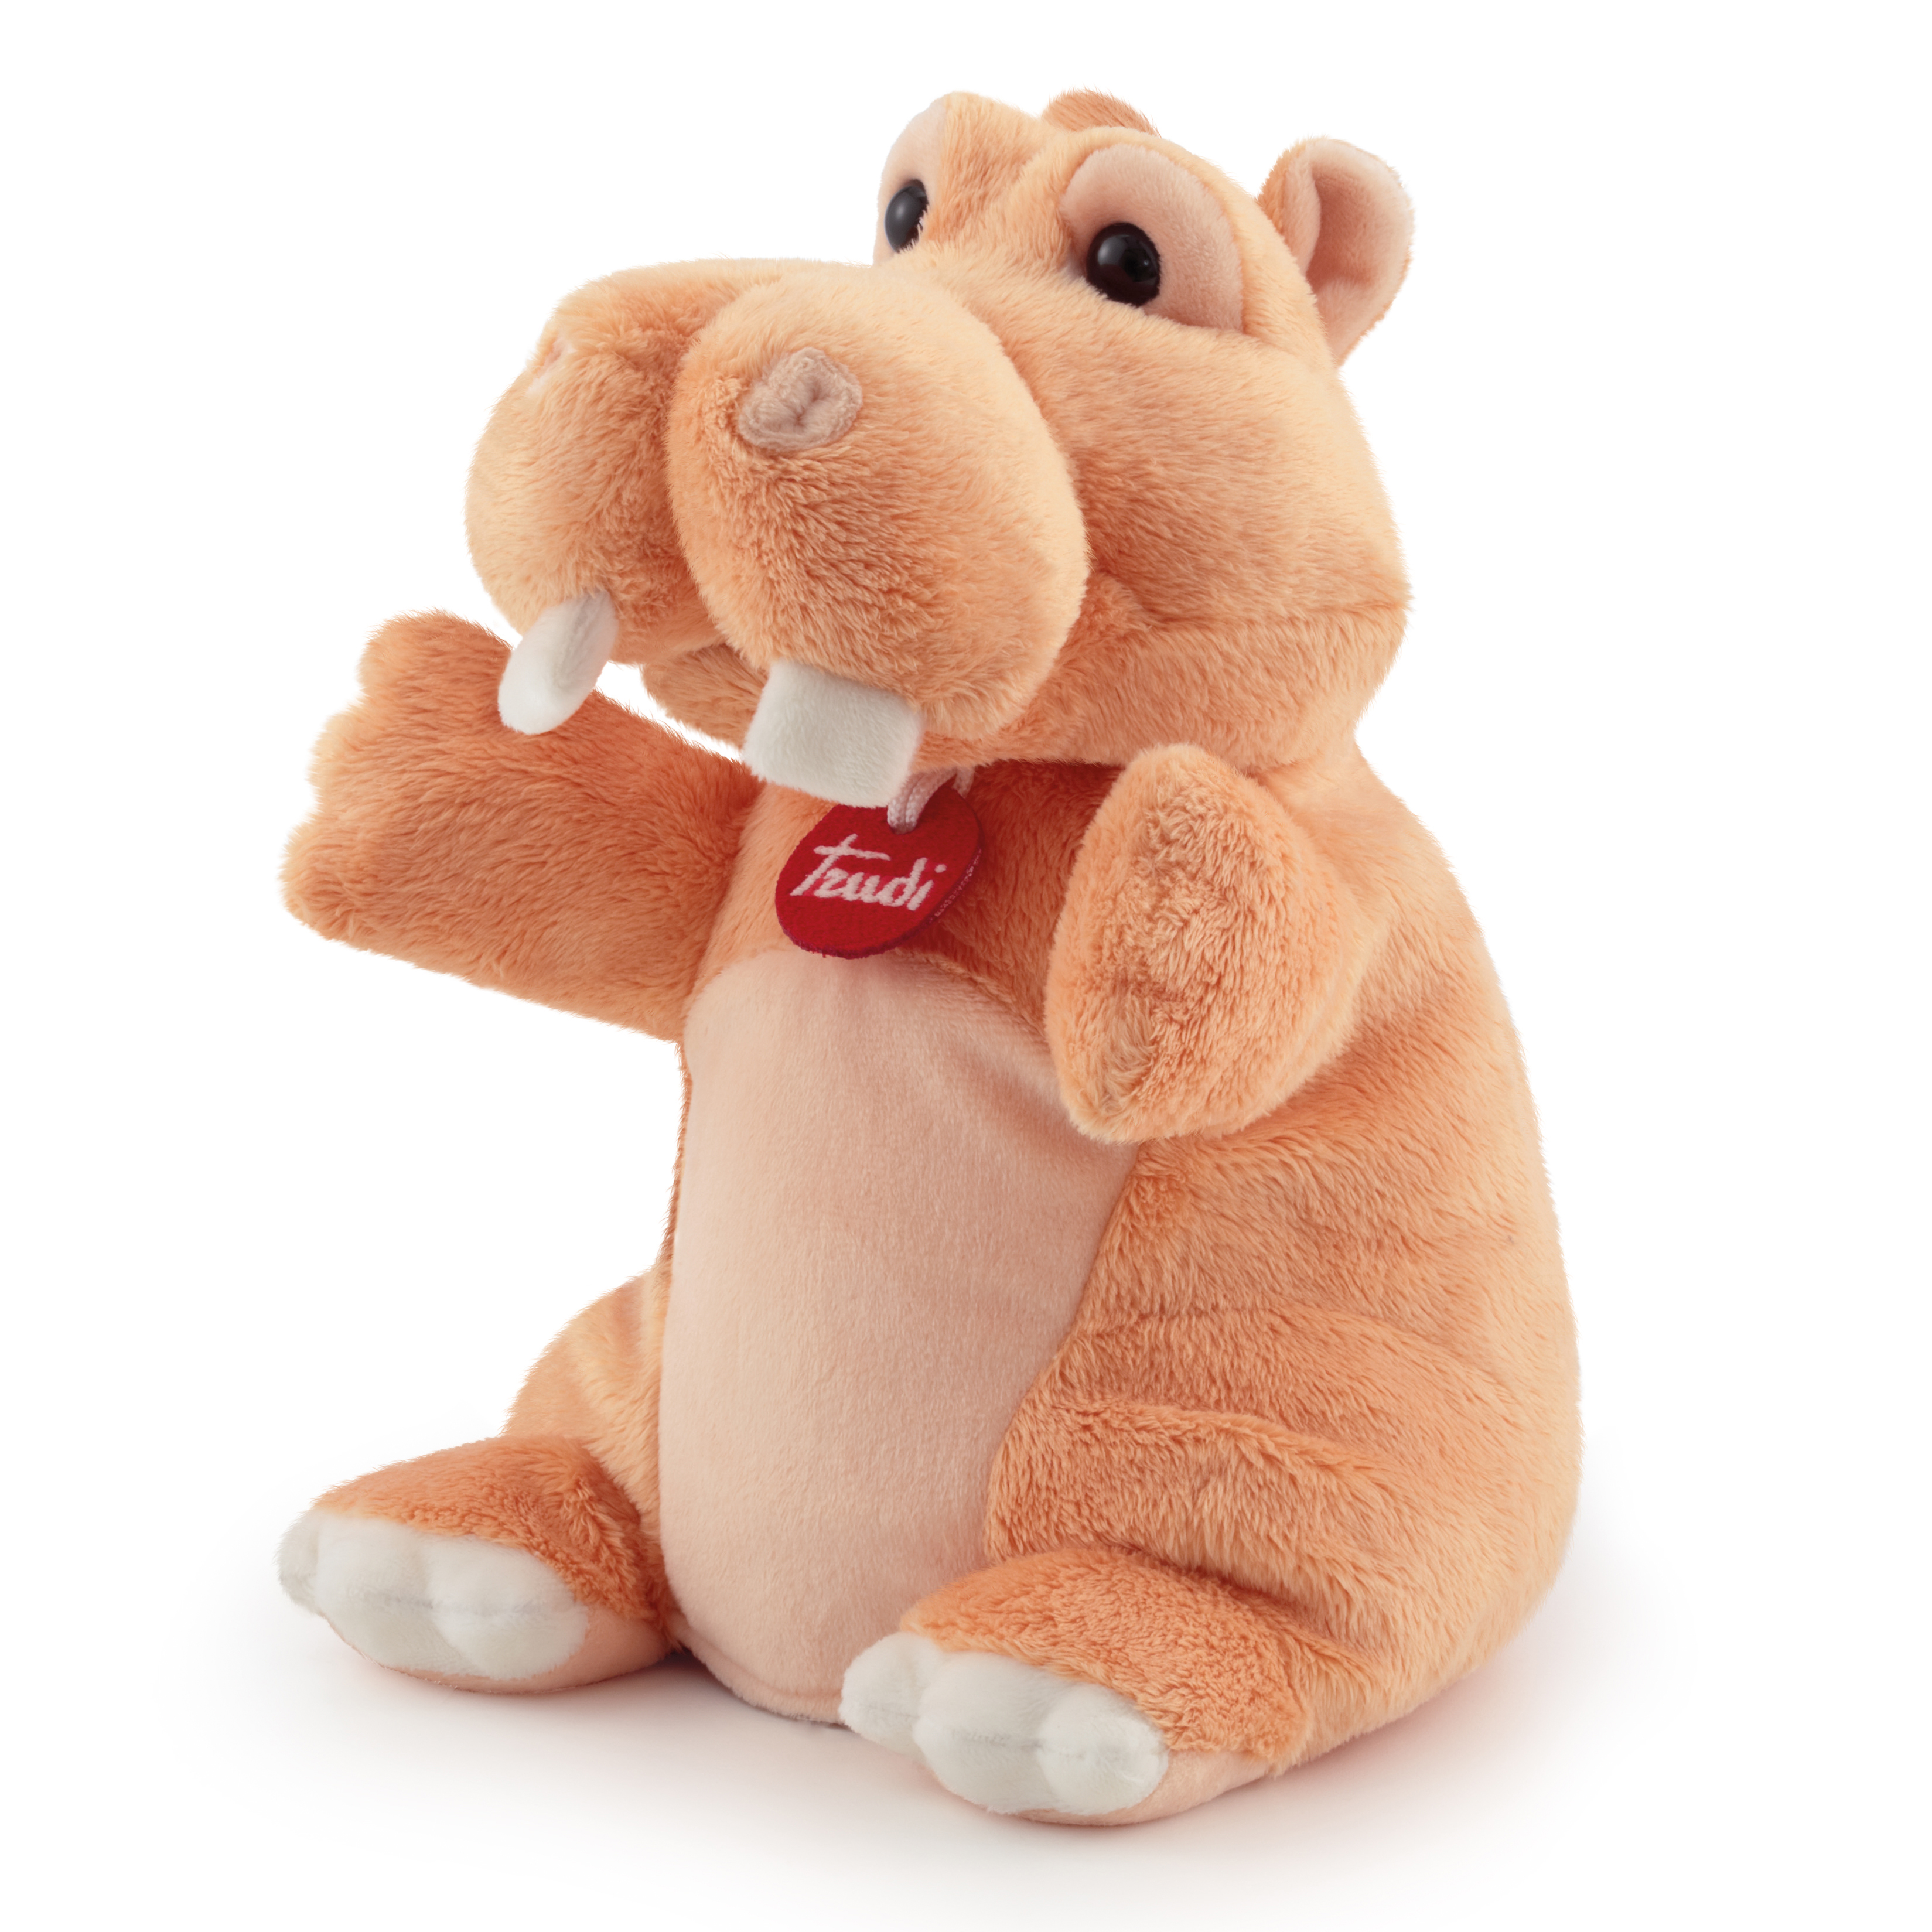 Hand puppet hippo by Trudi